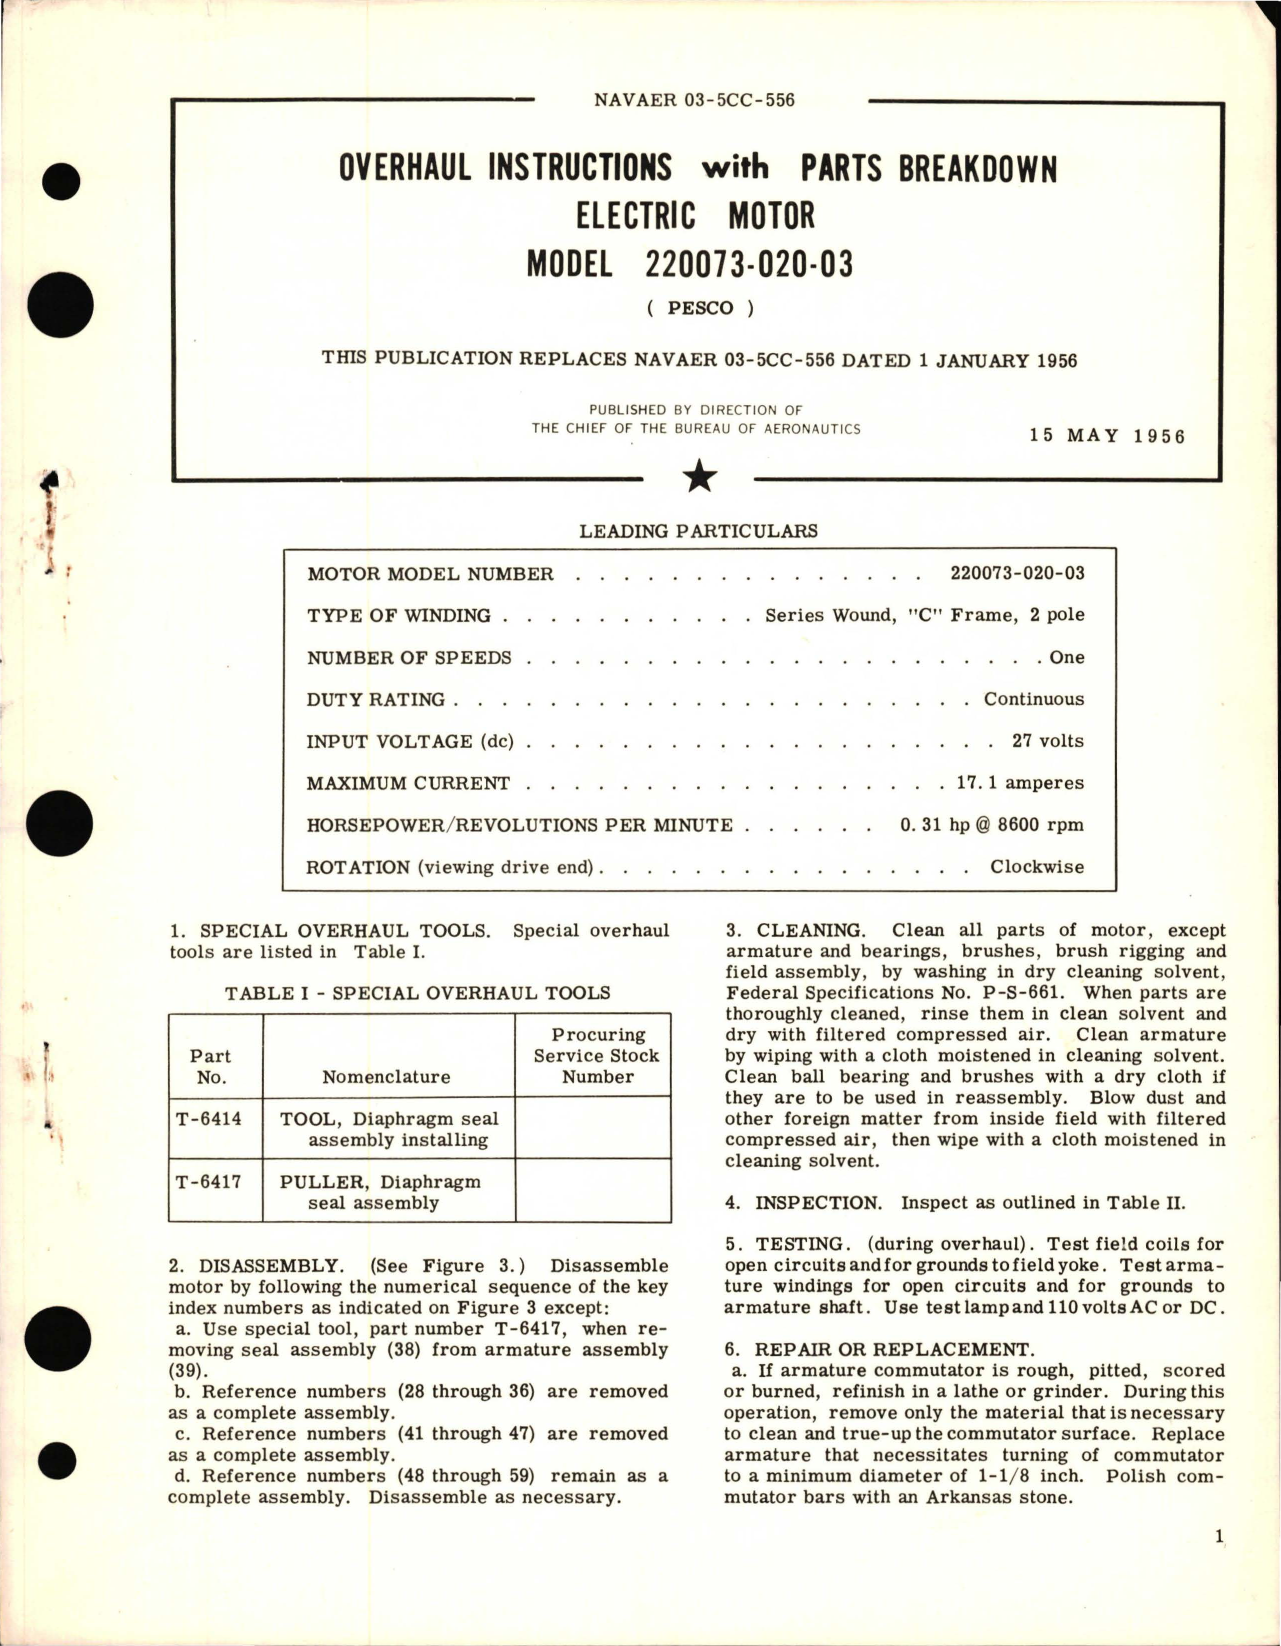 Sample page 1 from AirCorps Library document: Overhaul Instructions with Parts Breakdown for Electric Motor - Model 220073-020-03  